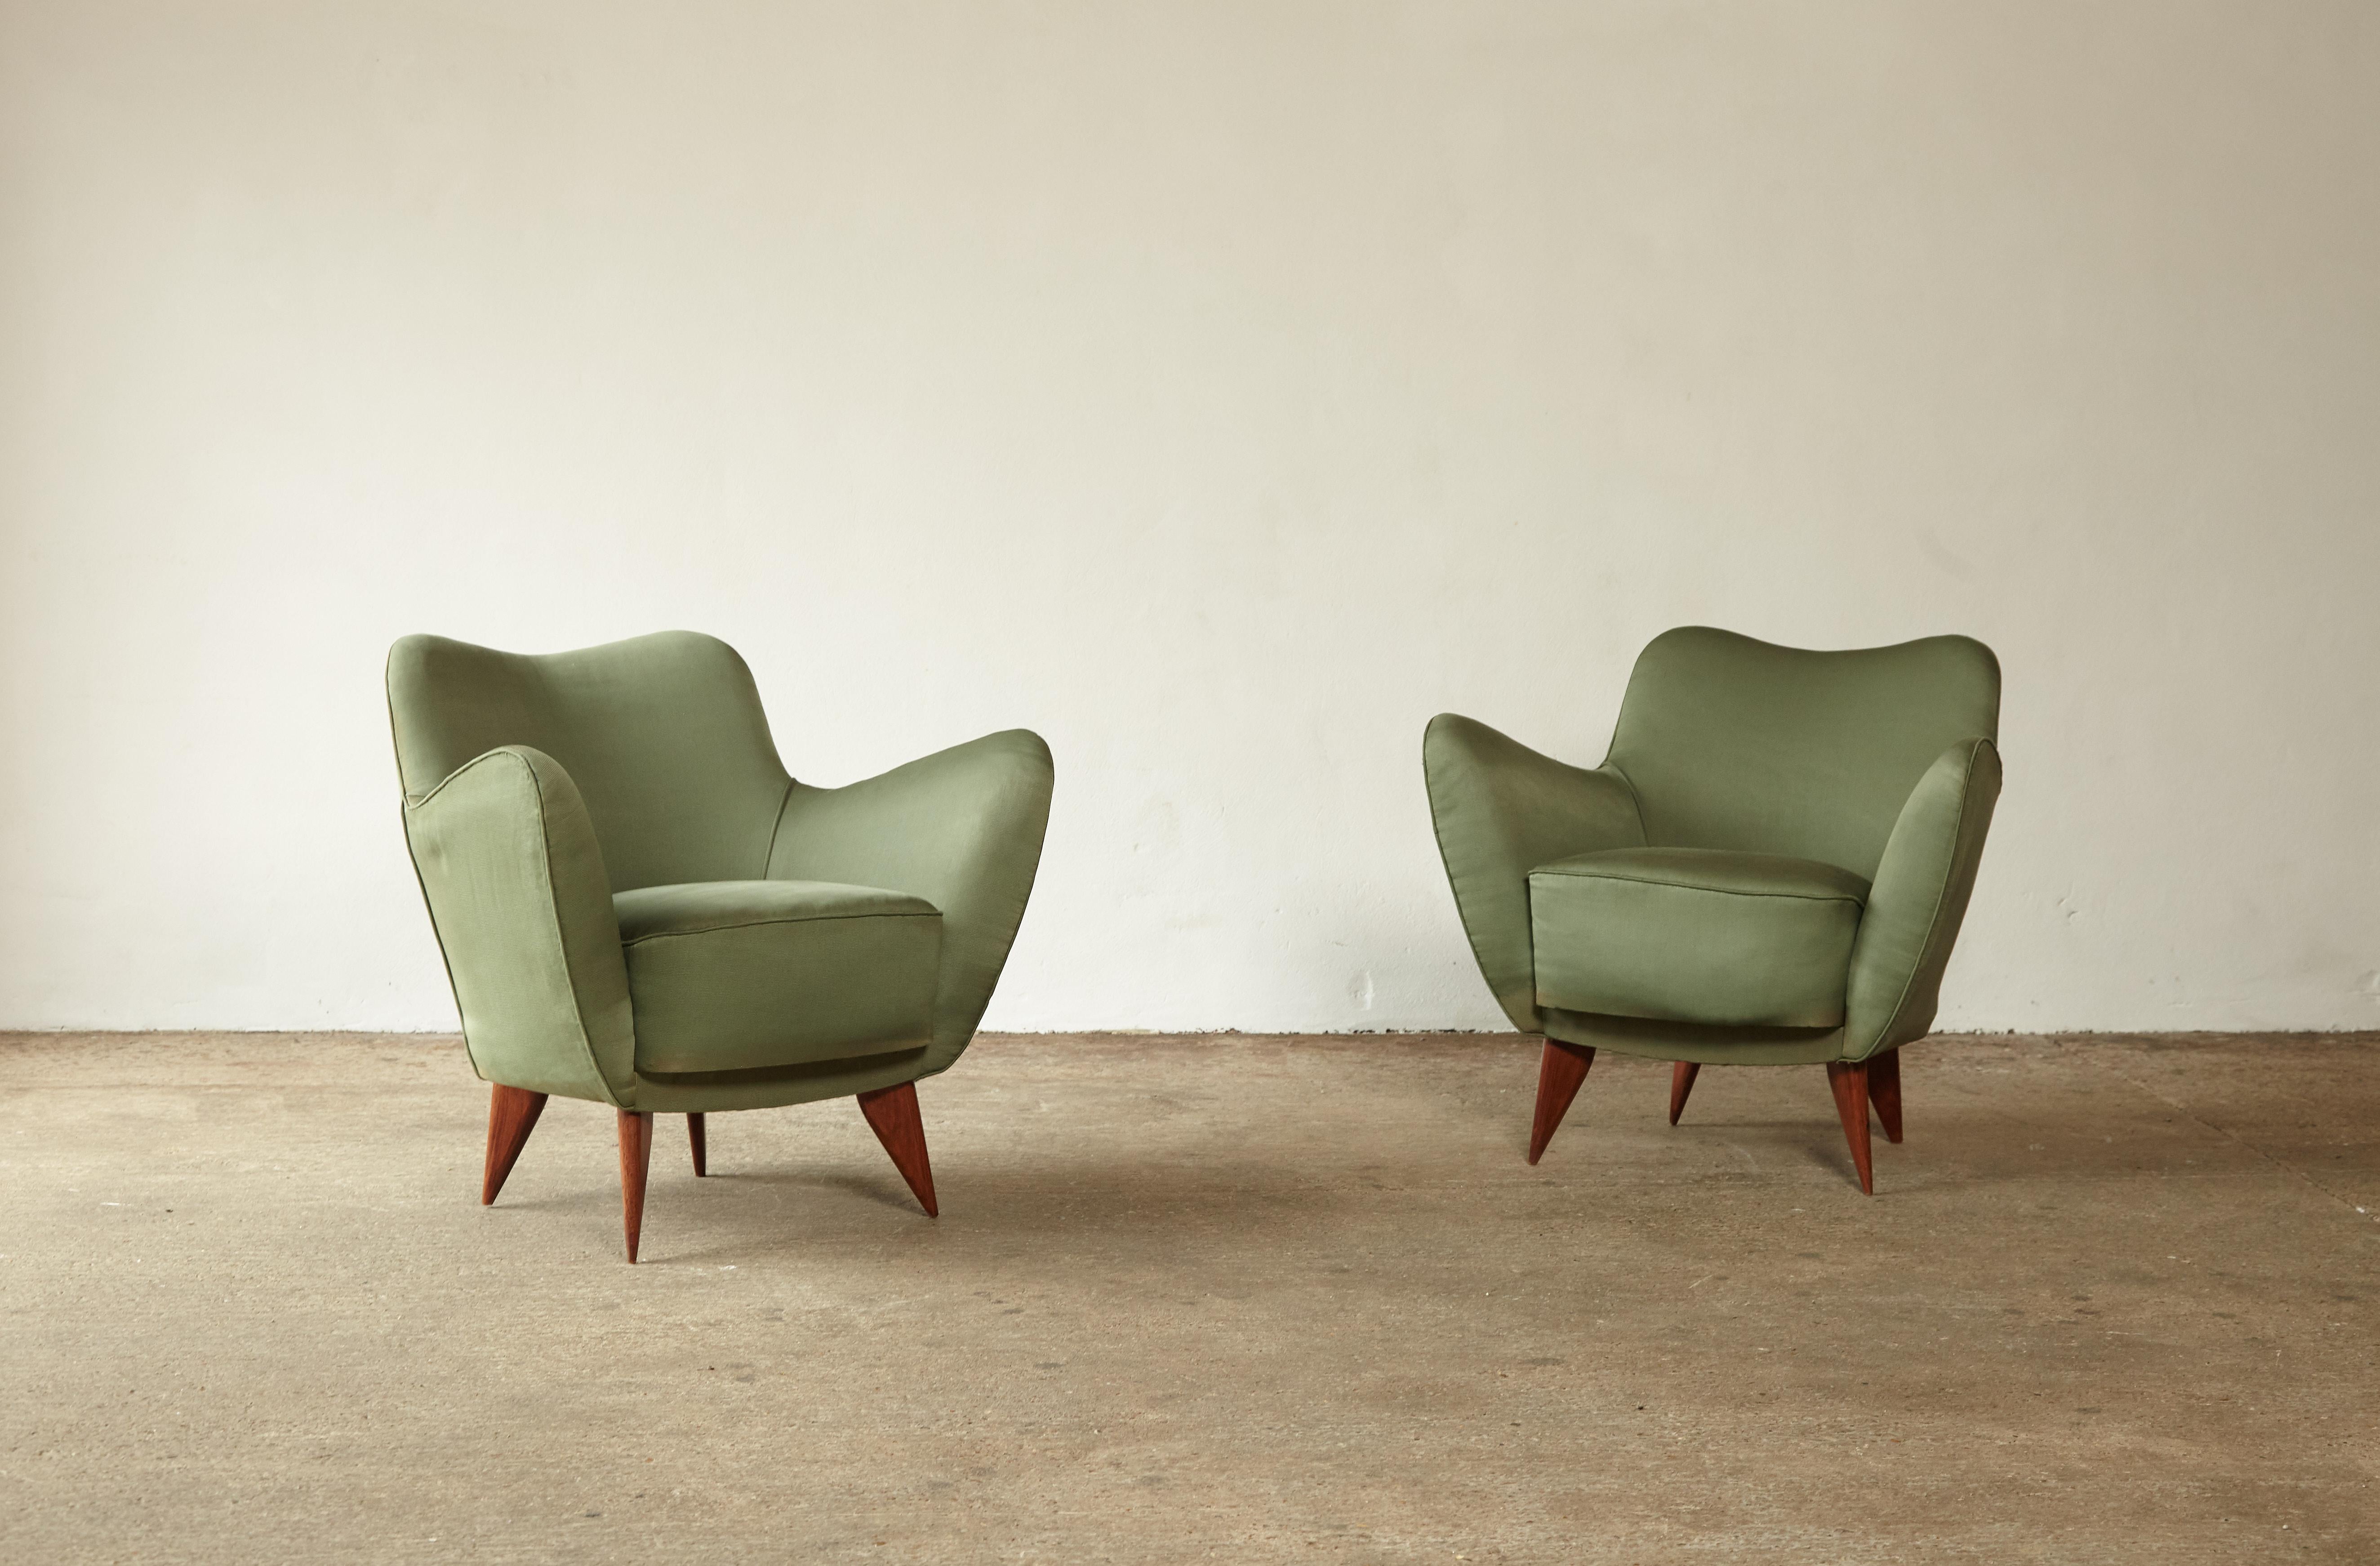 A wonderful pair of original Giulia Veronesi Perla armchairs, I.S.A. Bergamo, Italy, 1950. Original green fabric with minor signs of use and wear relative to age. Recovering is possible and we can assist if required.   Fast shipping